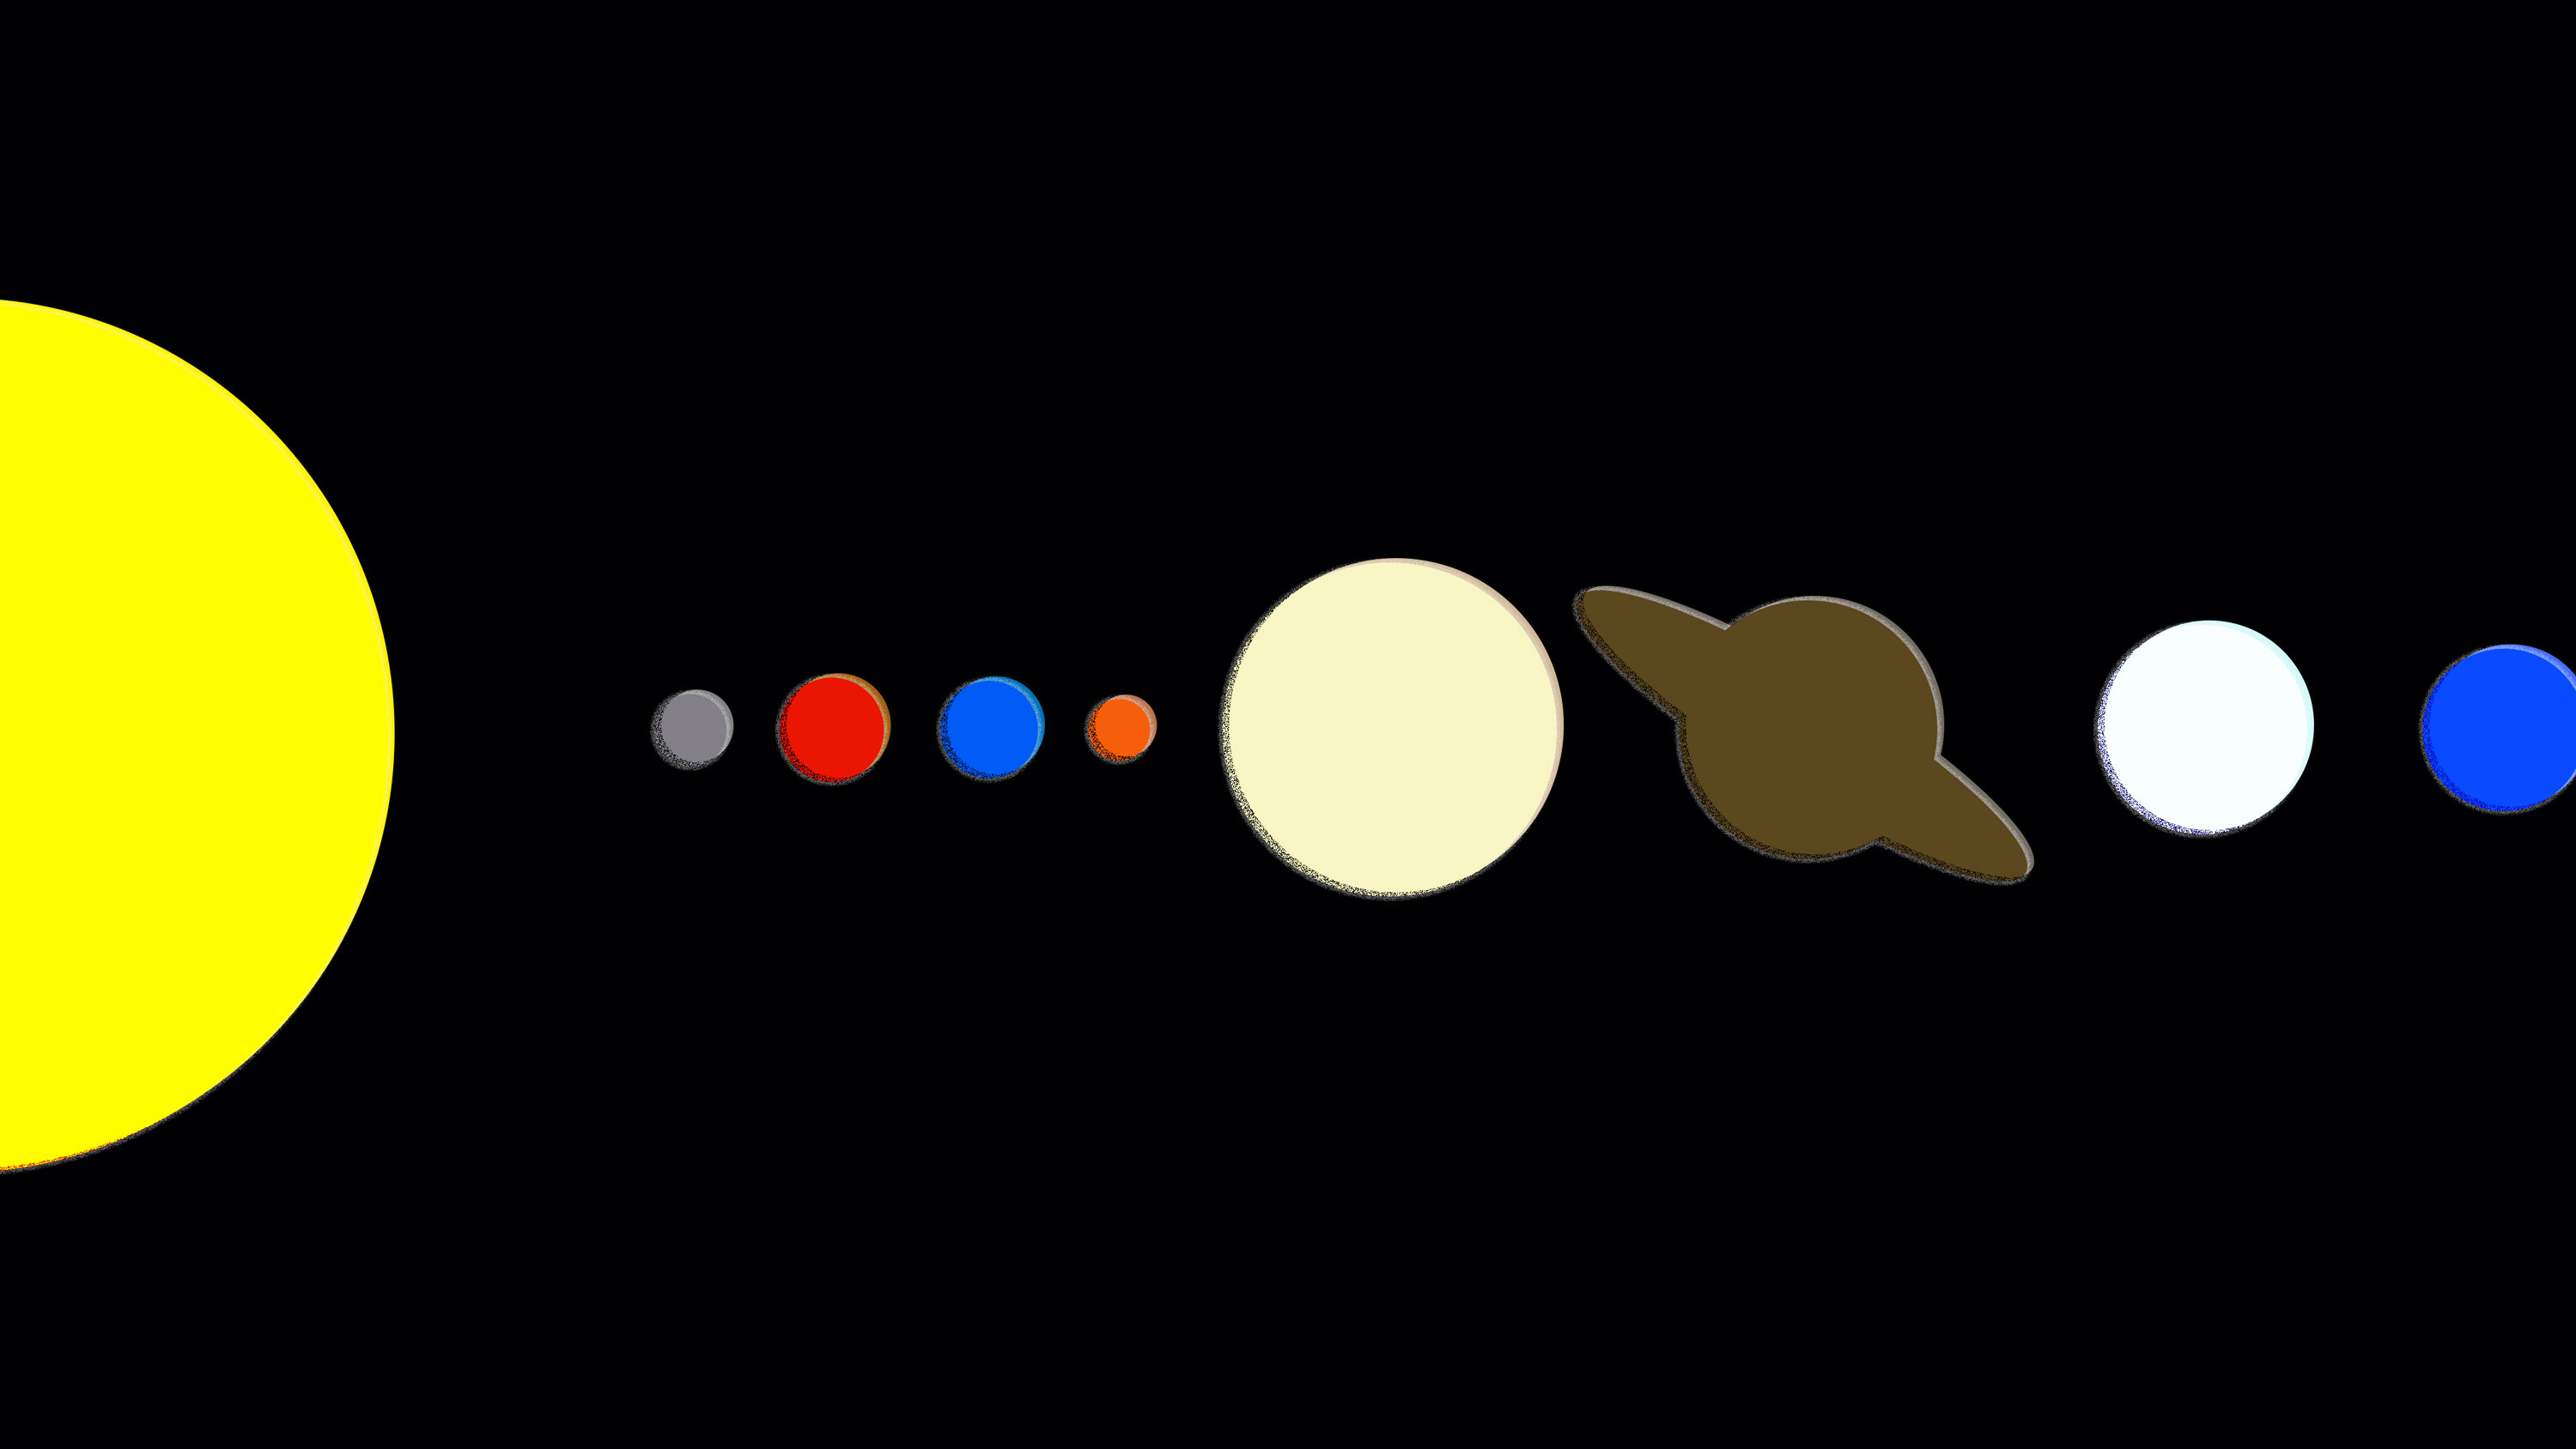 An illustration showing the planets in the solar system